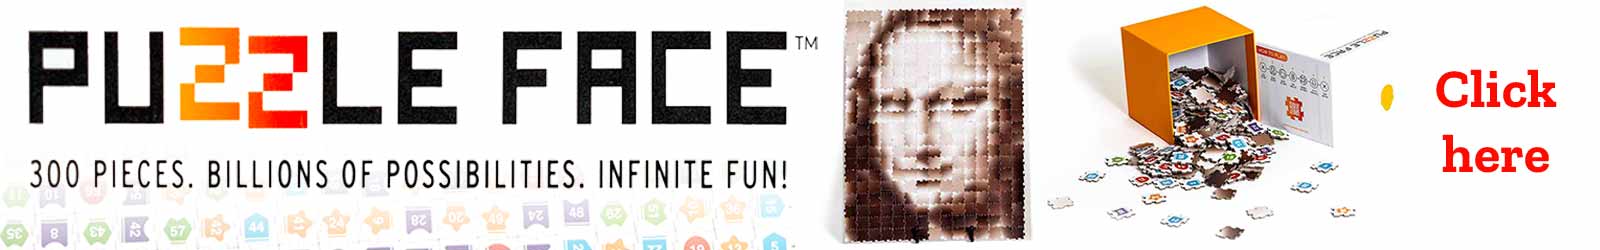 Puzzle Face 300 pieces. Billions of possibilities. Infinite fun! loading=